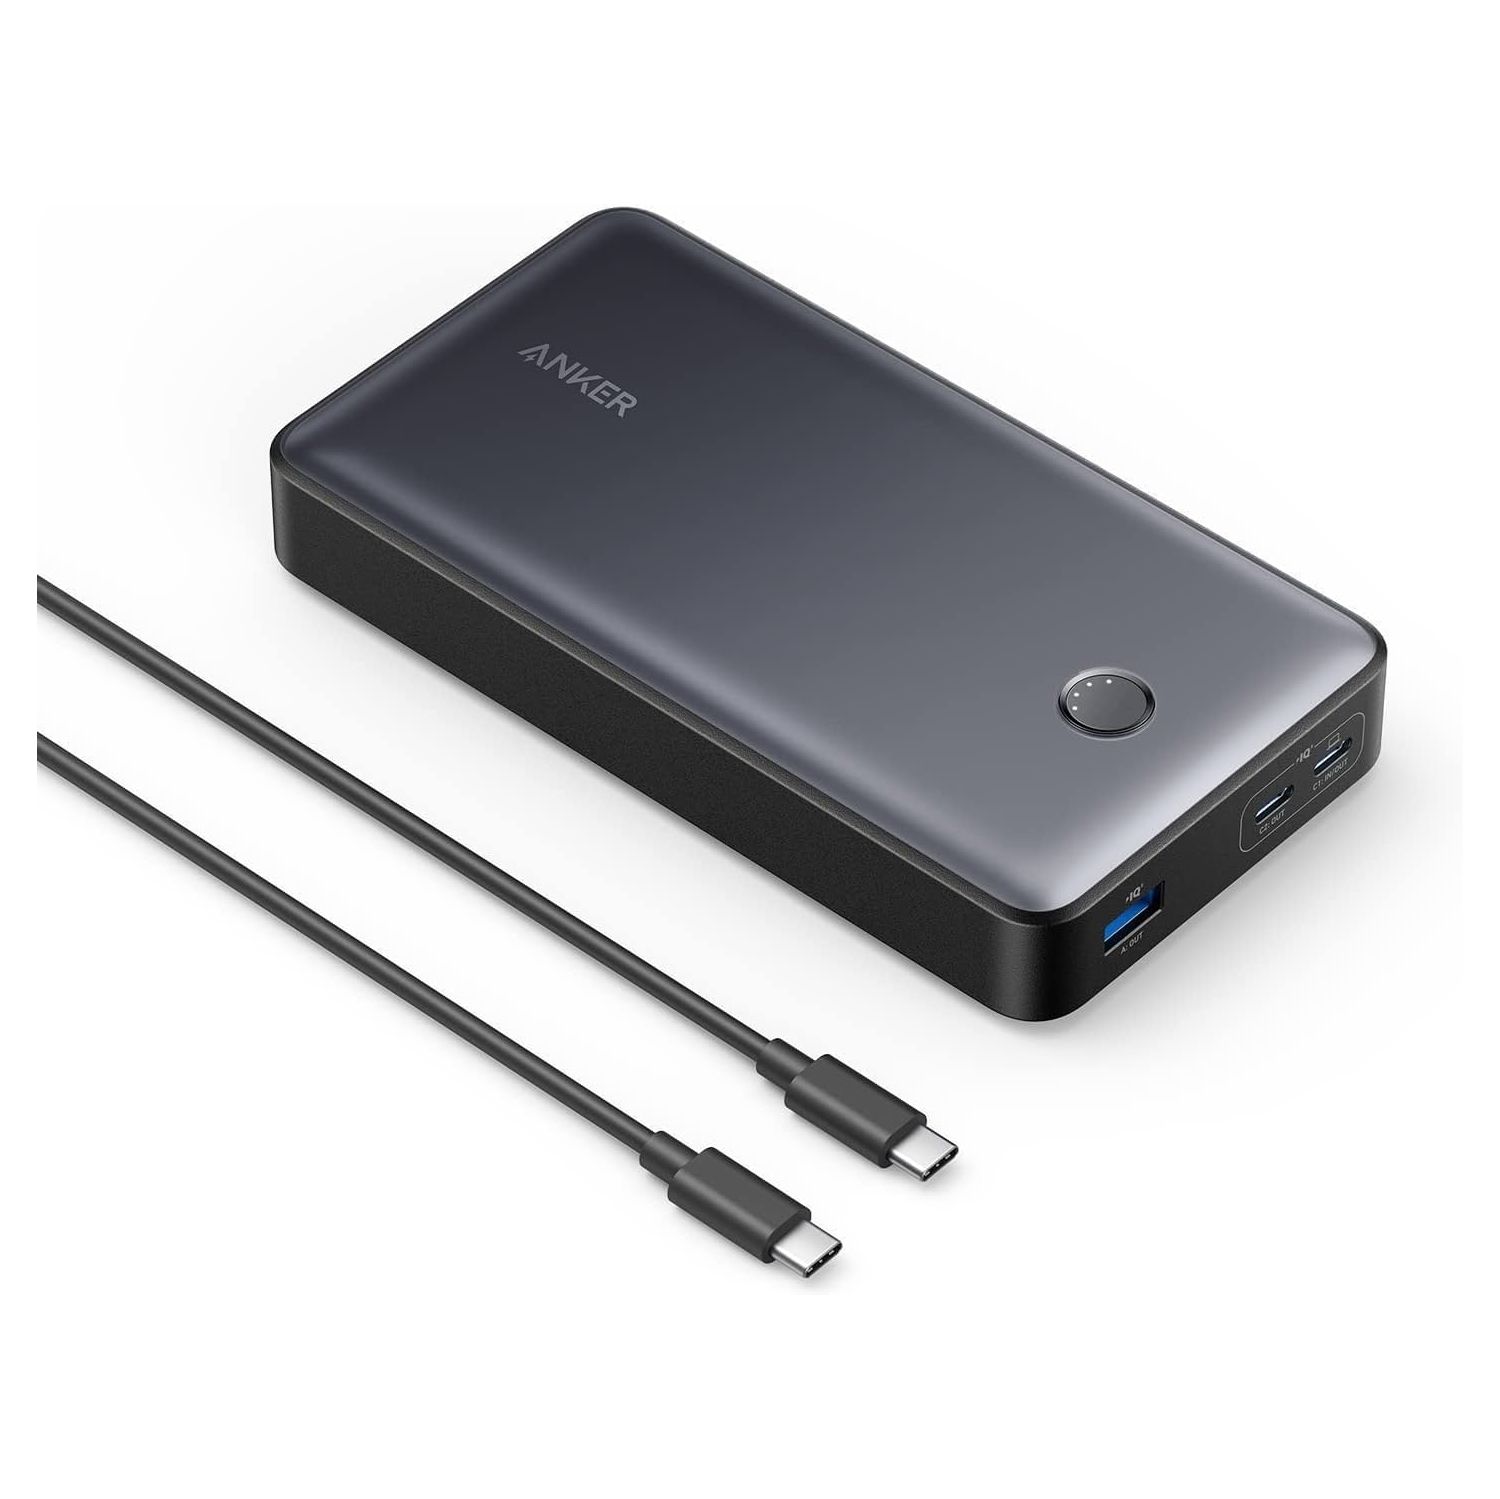 Anker Power Bank, 24,000 mAh Portable Charger 65W Battery Pack (PowerCore for Laptop)